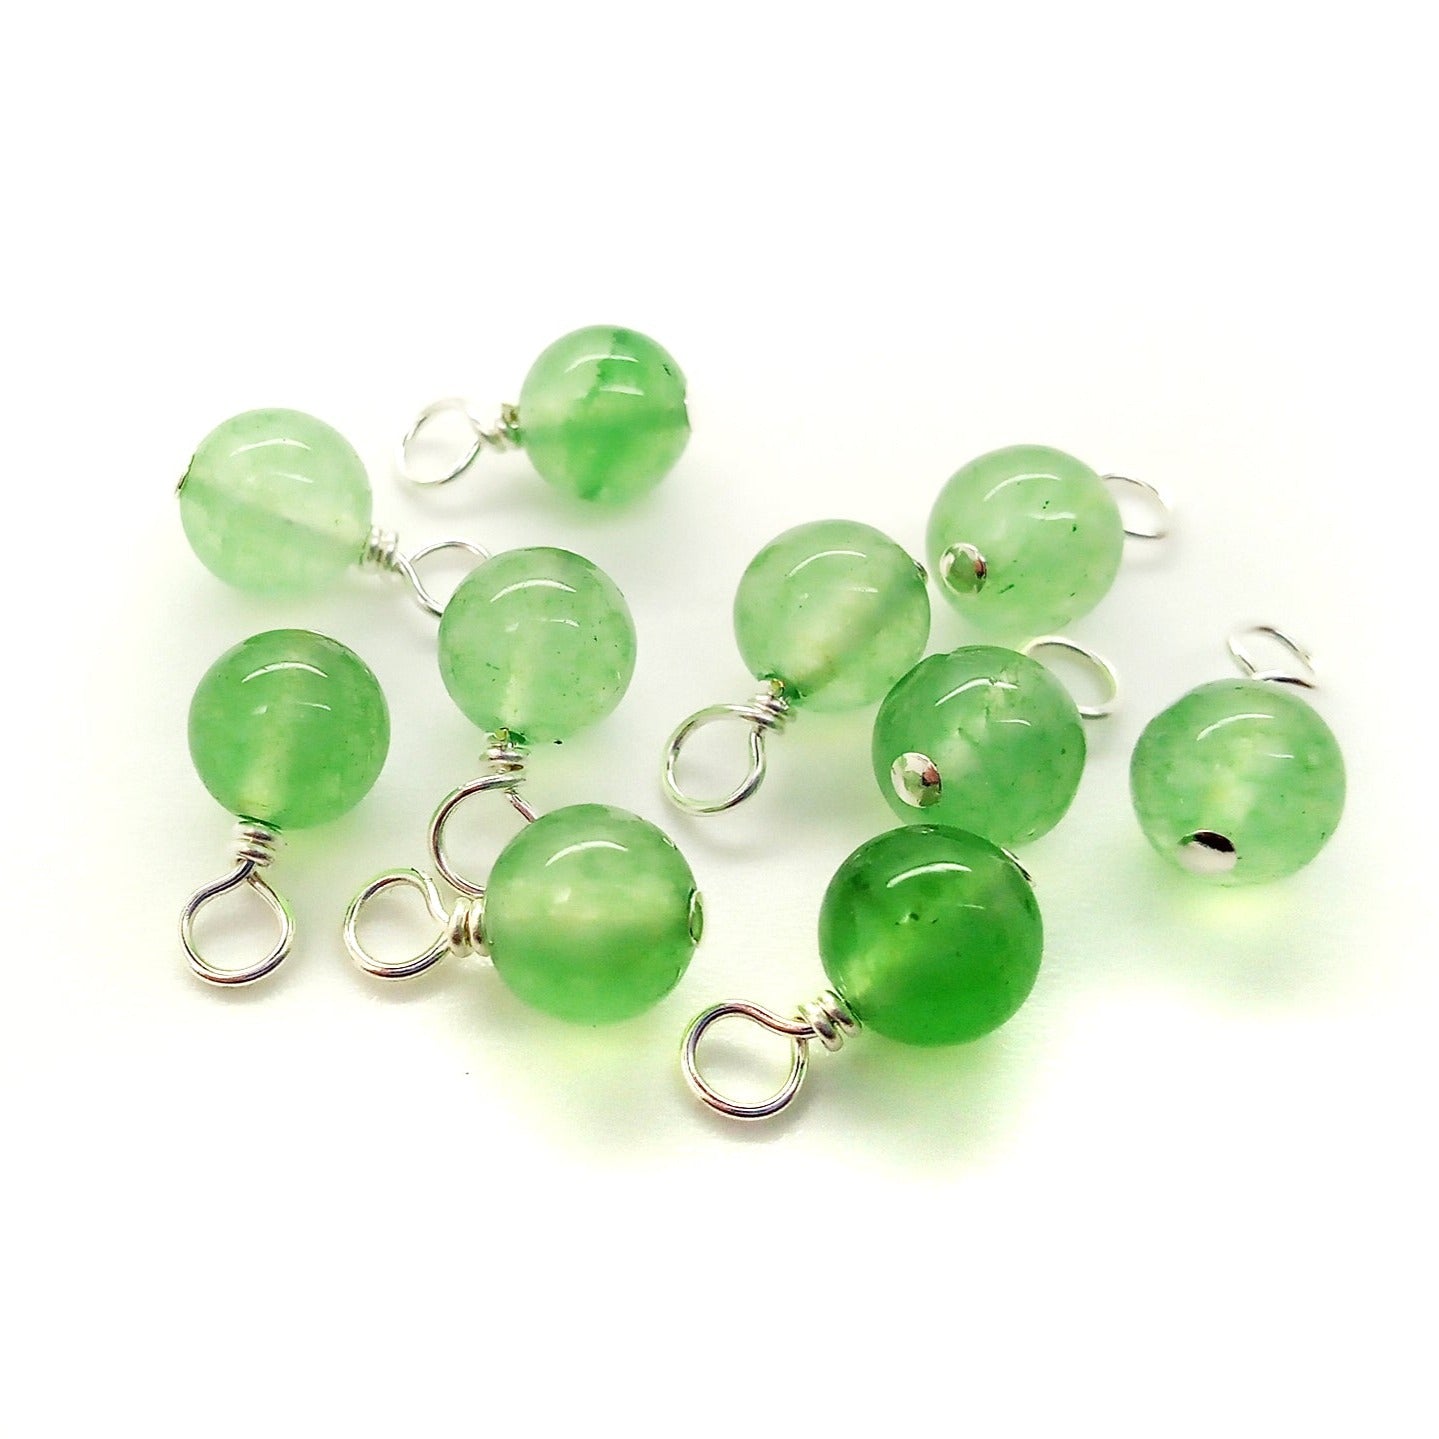 Green Chalcedony Bead Charms, Natural 6mm Gemstone Dangles